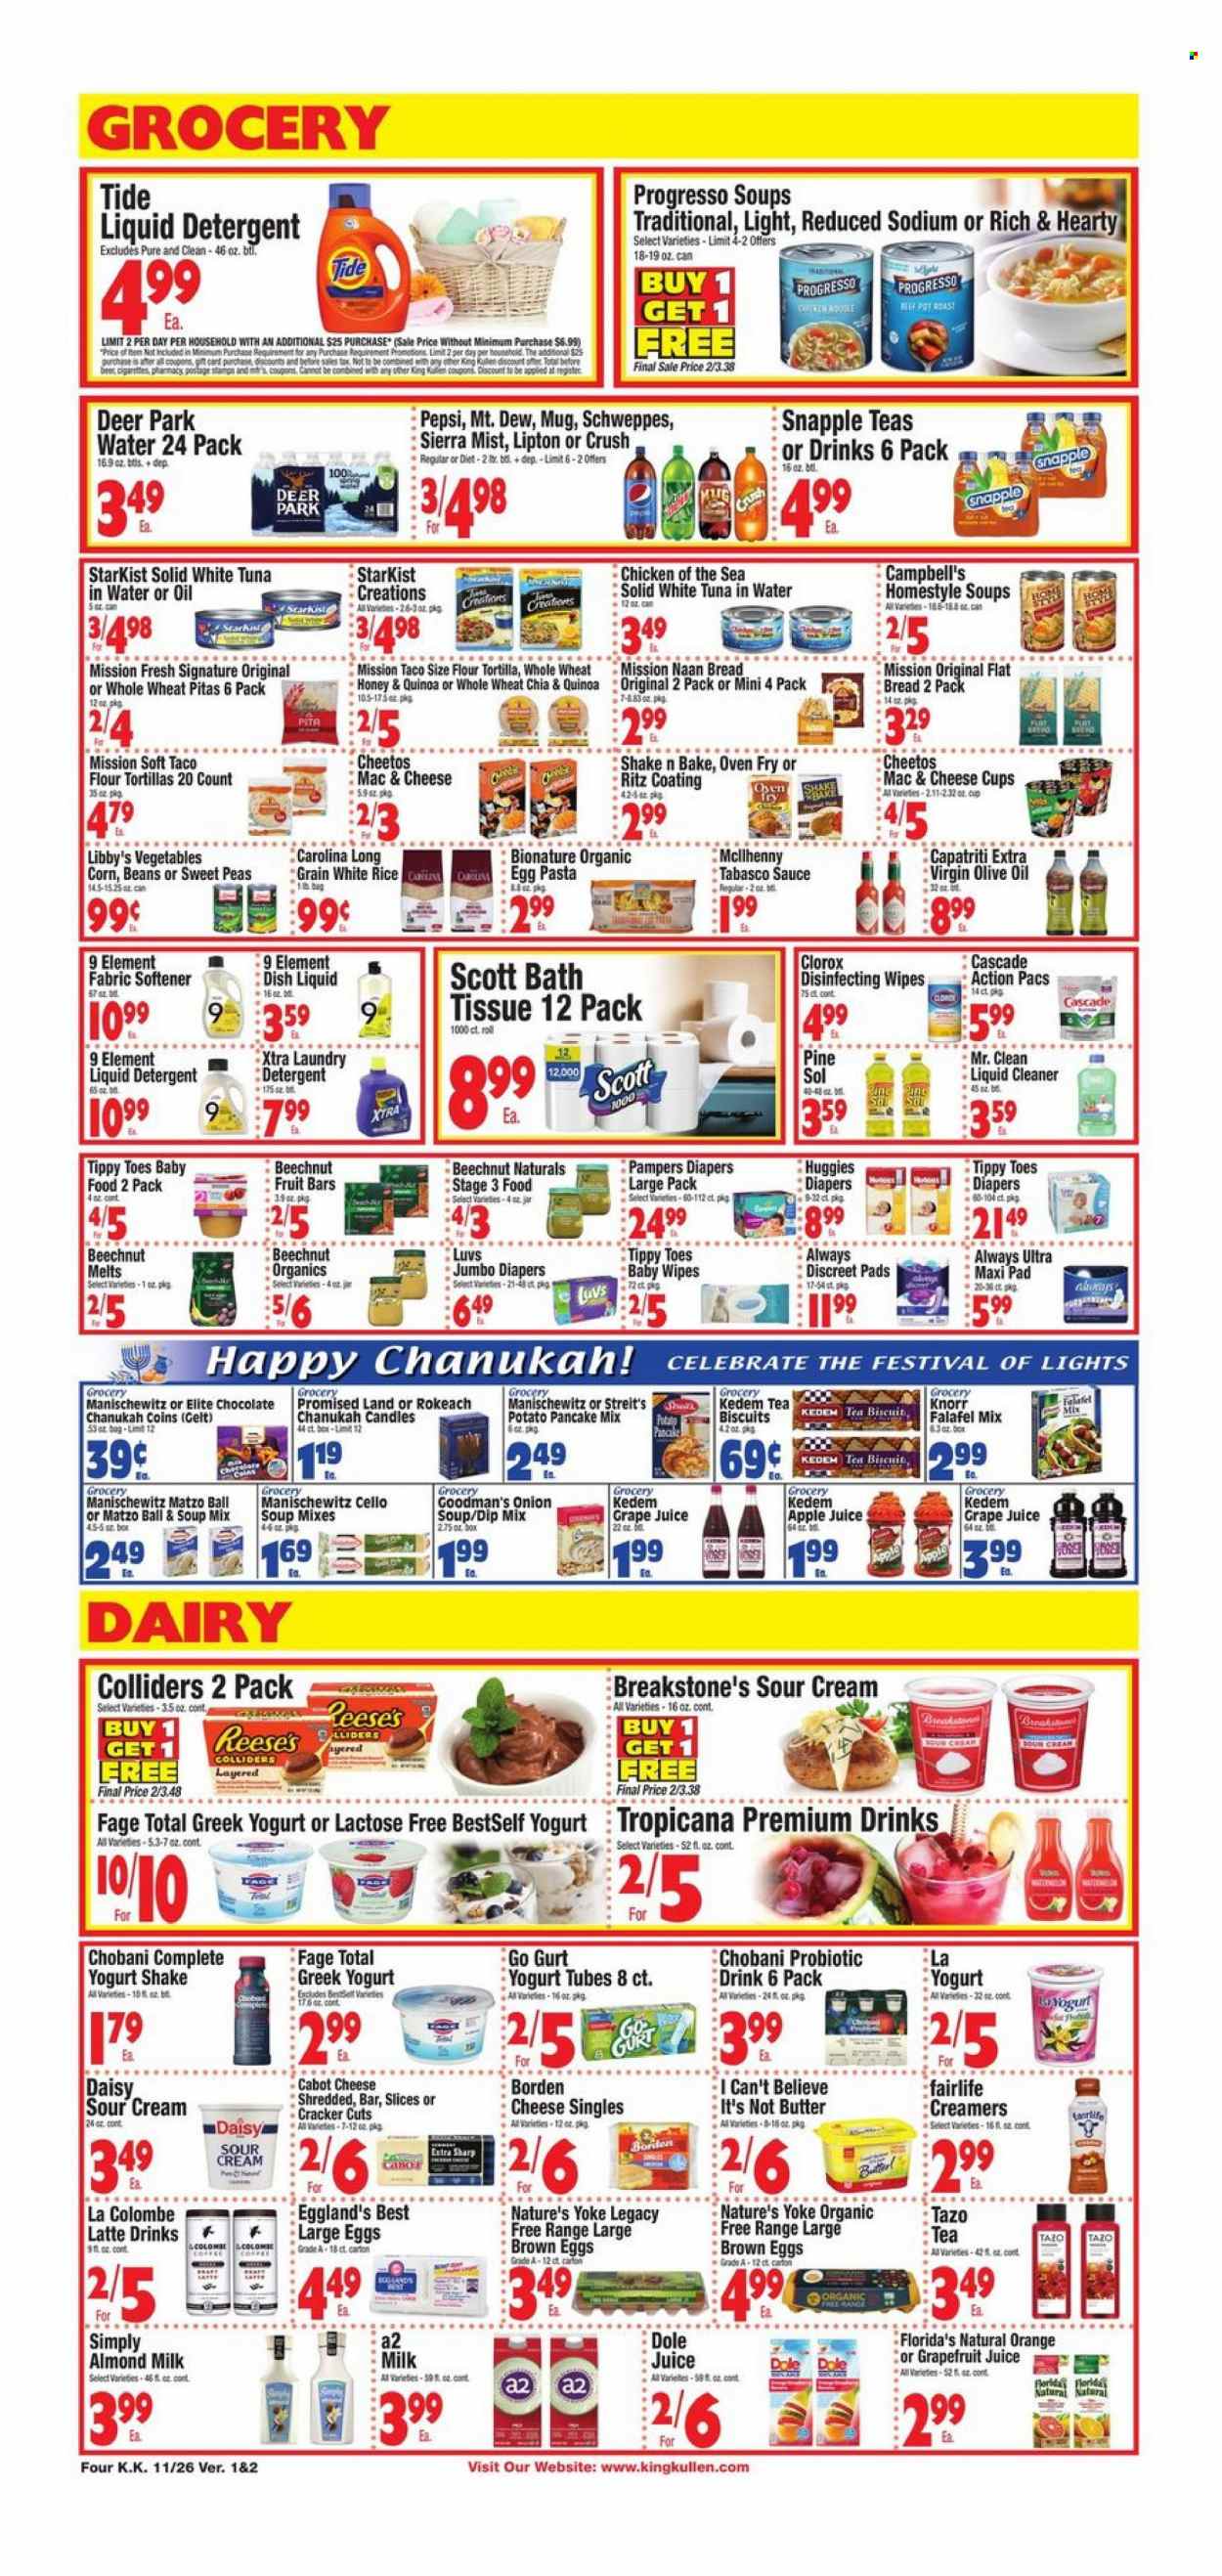 thumbnail - King Kullen Flyer - 11/26/2021 - 12/02/2021 - Sales products - bread, tortillas, pita, flour tortillas, beans, corn, peas, Dole, oranges, tuna, StarKist, Campbell's, onion soup, soup mix, soup, pasta, Knorr, sauce, pancakes, MTR, noodles, Progresso, cheese cup, greek yoghurt, yoghurt, Chobani, almond milk, shake, large eggs, butter, I Can't Believe It's Not Butter, sour cream, dip, Reese's, chocolate, crackers, biscuit, Florida's Natural, RITZ, Cheetos, tabasco, tuna in water, Chicken of the Sea, quinoa, rice, white rice, olive oil, honey, apple juice, Schweppes, Pepsi, juice, Lipton, Snapple, Kedem, Sierra Mist, beer, wipes, Huggies, Pampers, baby wipes, nappies, bath tissue, Scott, detergent, cleaner, liquid cleaner, Clorox, Pine-Sol, Cascade, Tide, fabric softener, liquid detergent, XTRA, dishwashing liquid, sanitary pads, Always Discreet, jar, candle, pot. Page 4.